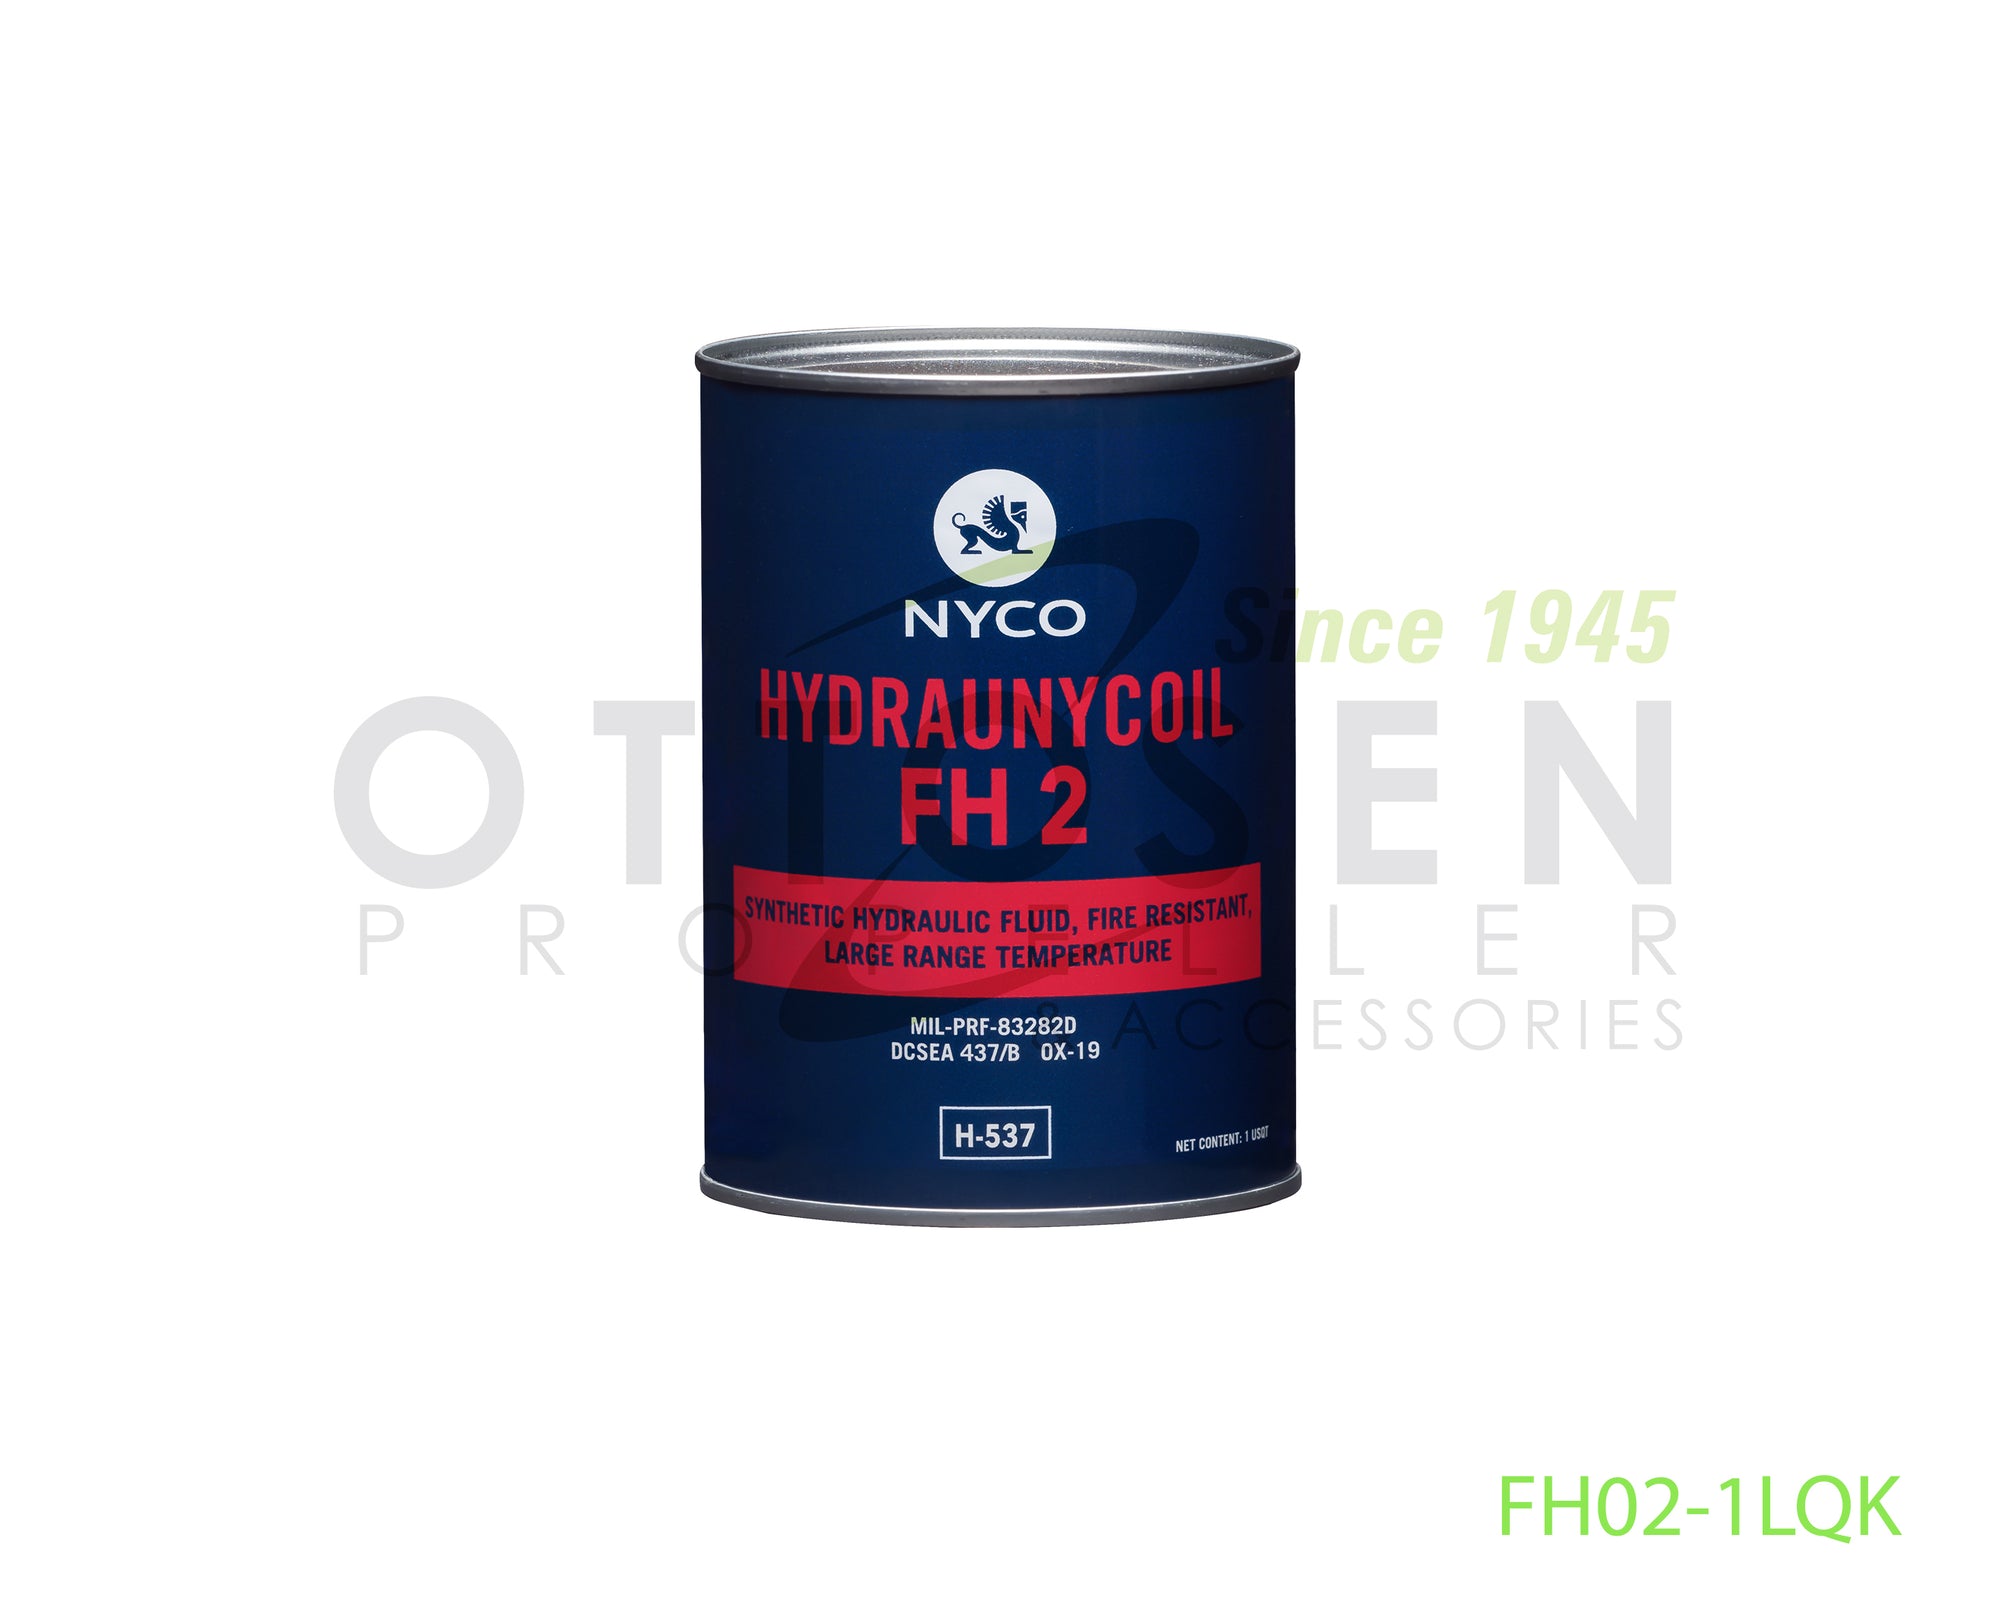 FH02-1LQK-NYCO-HYDRAULIC-FLUID-PICTURE-1